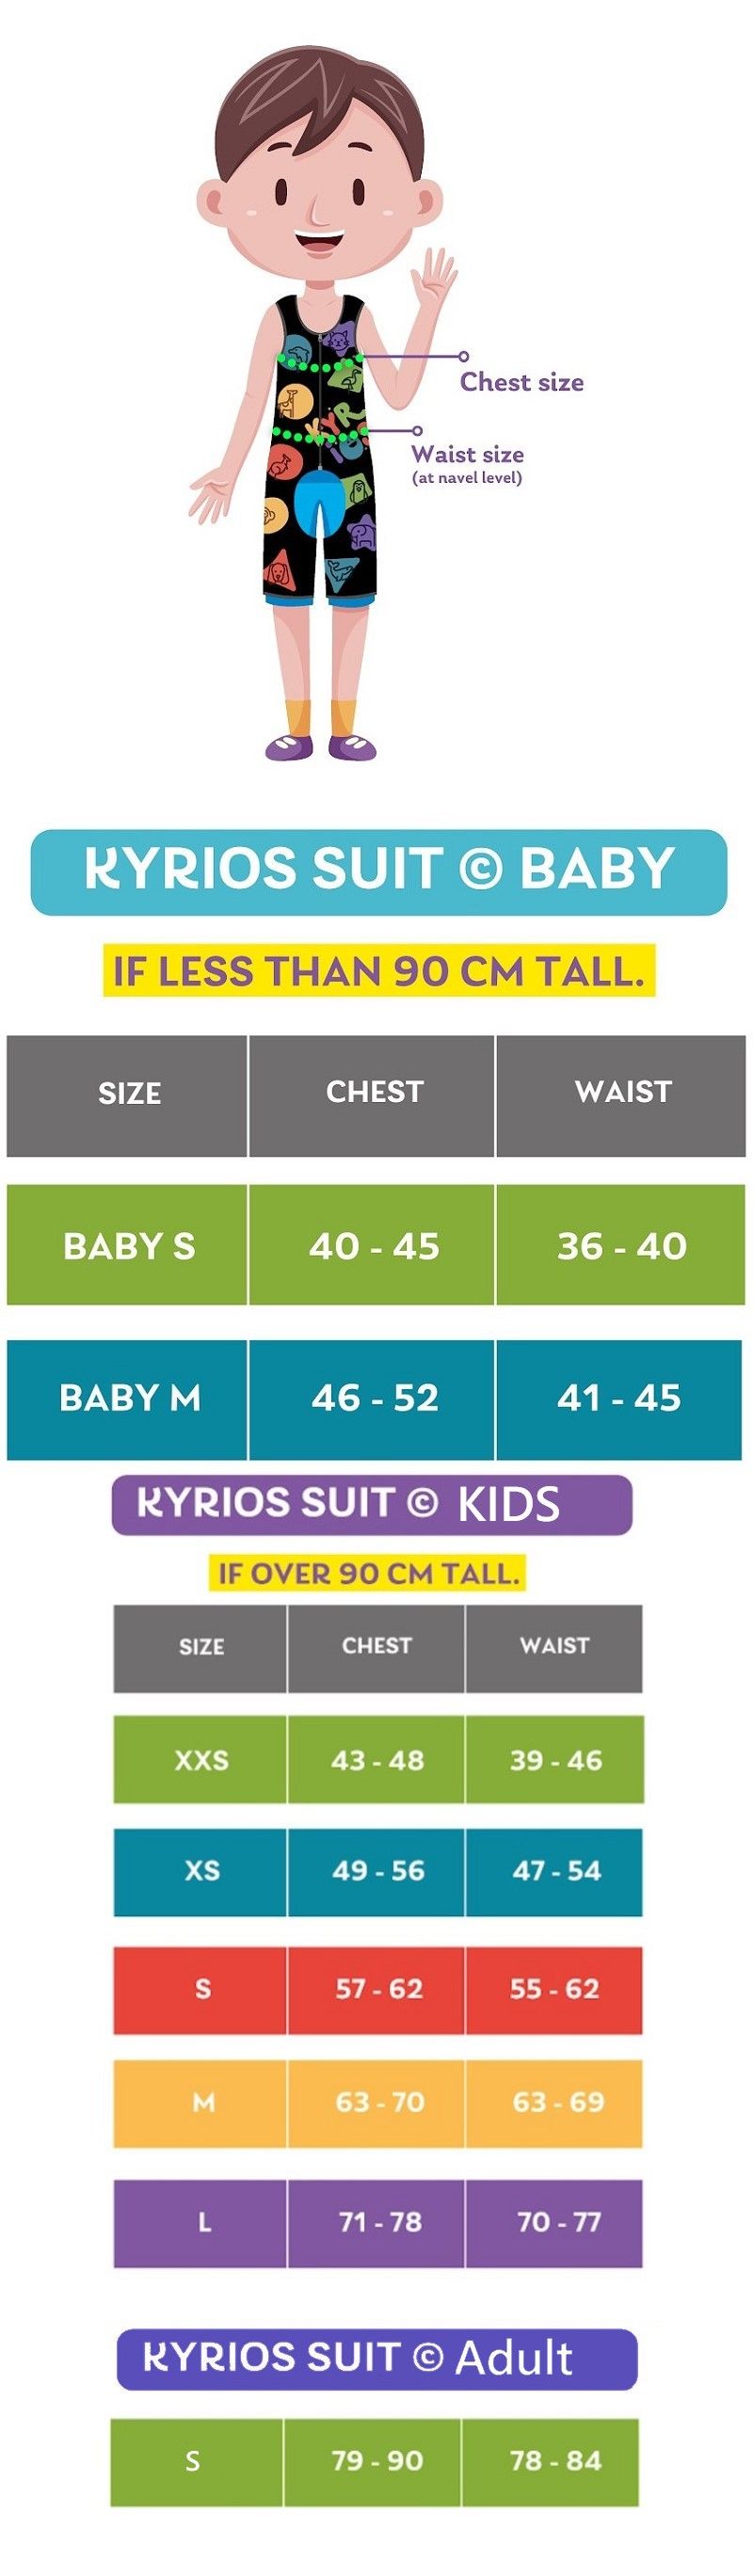 Suit Therapy for Kids - Kyrios Suit Picture